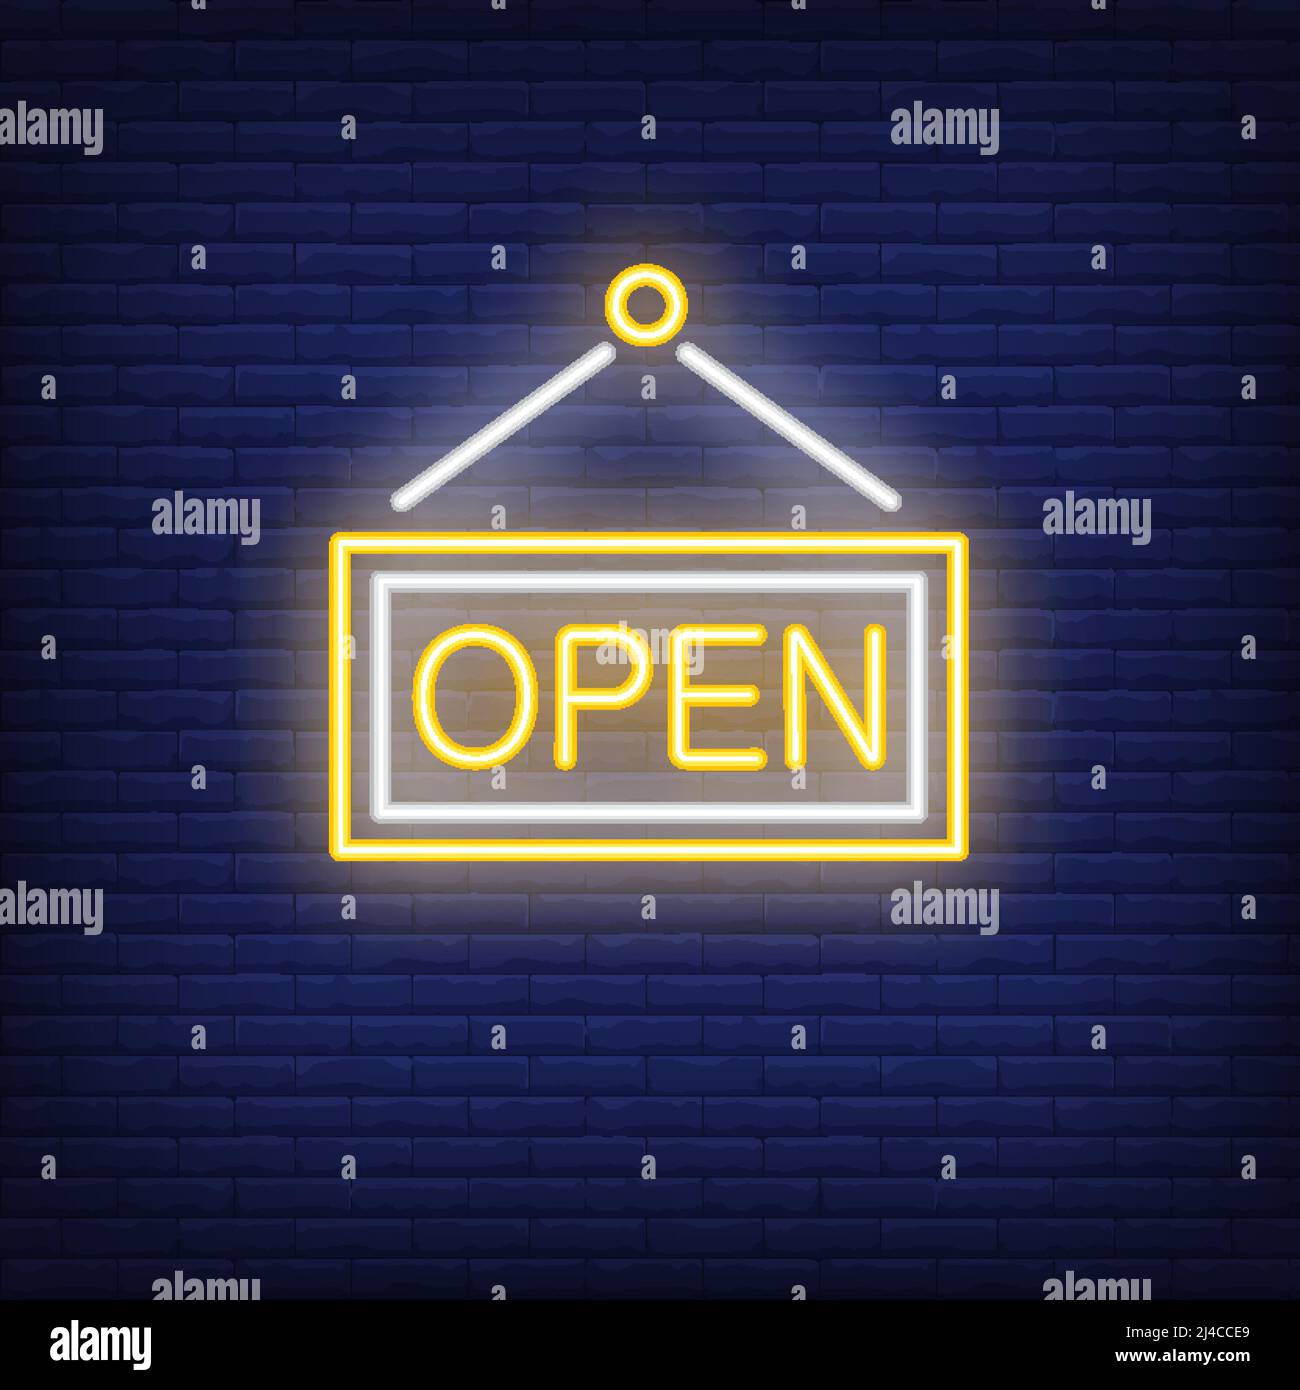 Open door neon sign. Information and message design. Night bright neon sign, colorful billboard, light banner. Vector illustration in neon style. Stock Vector